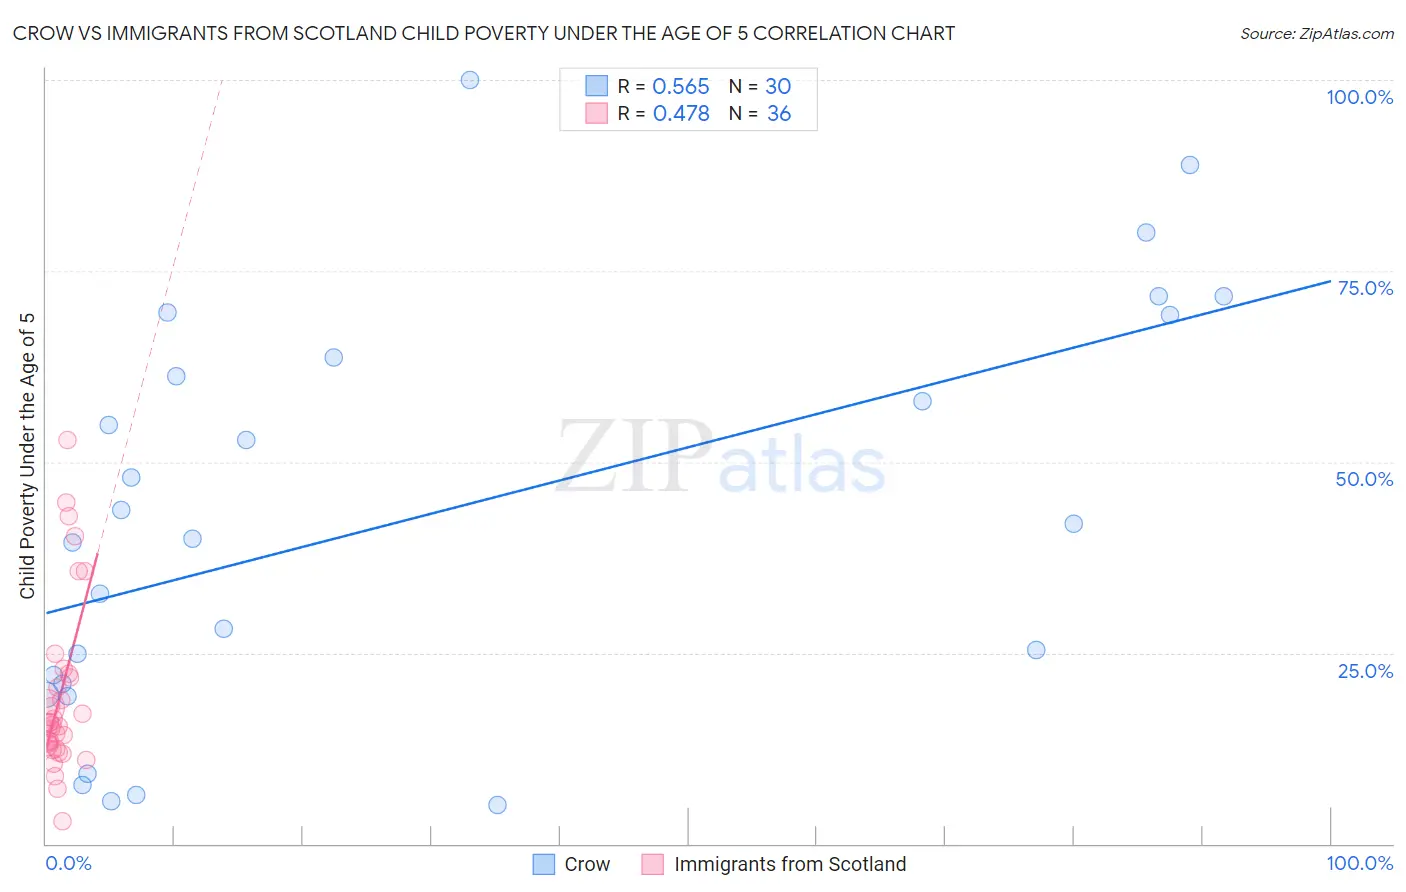 Crow vs Immigrants from Scotland Child Poverty Under the Age of 5